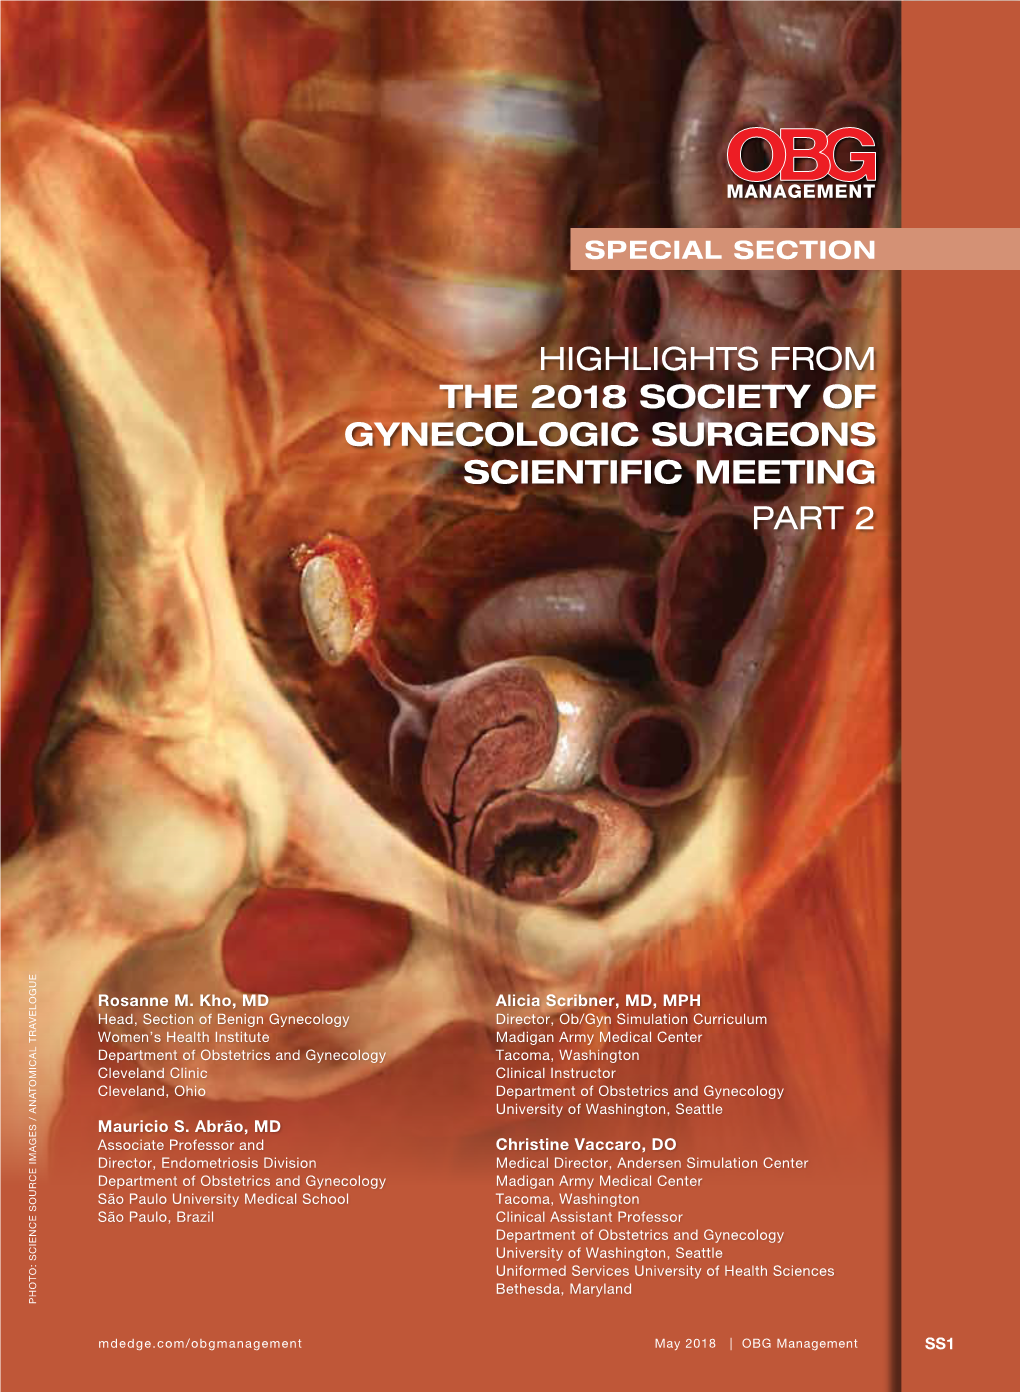 Highlights from the 2018 Society of Gynecologic Surgeons Scientific Meeting Part 2